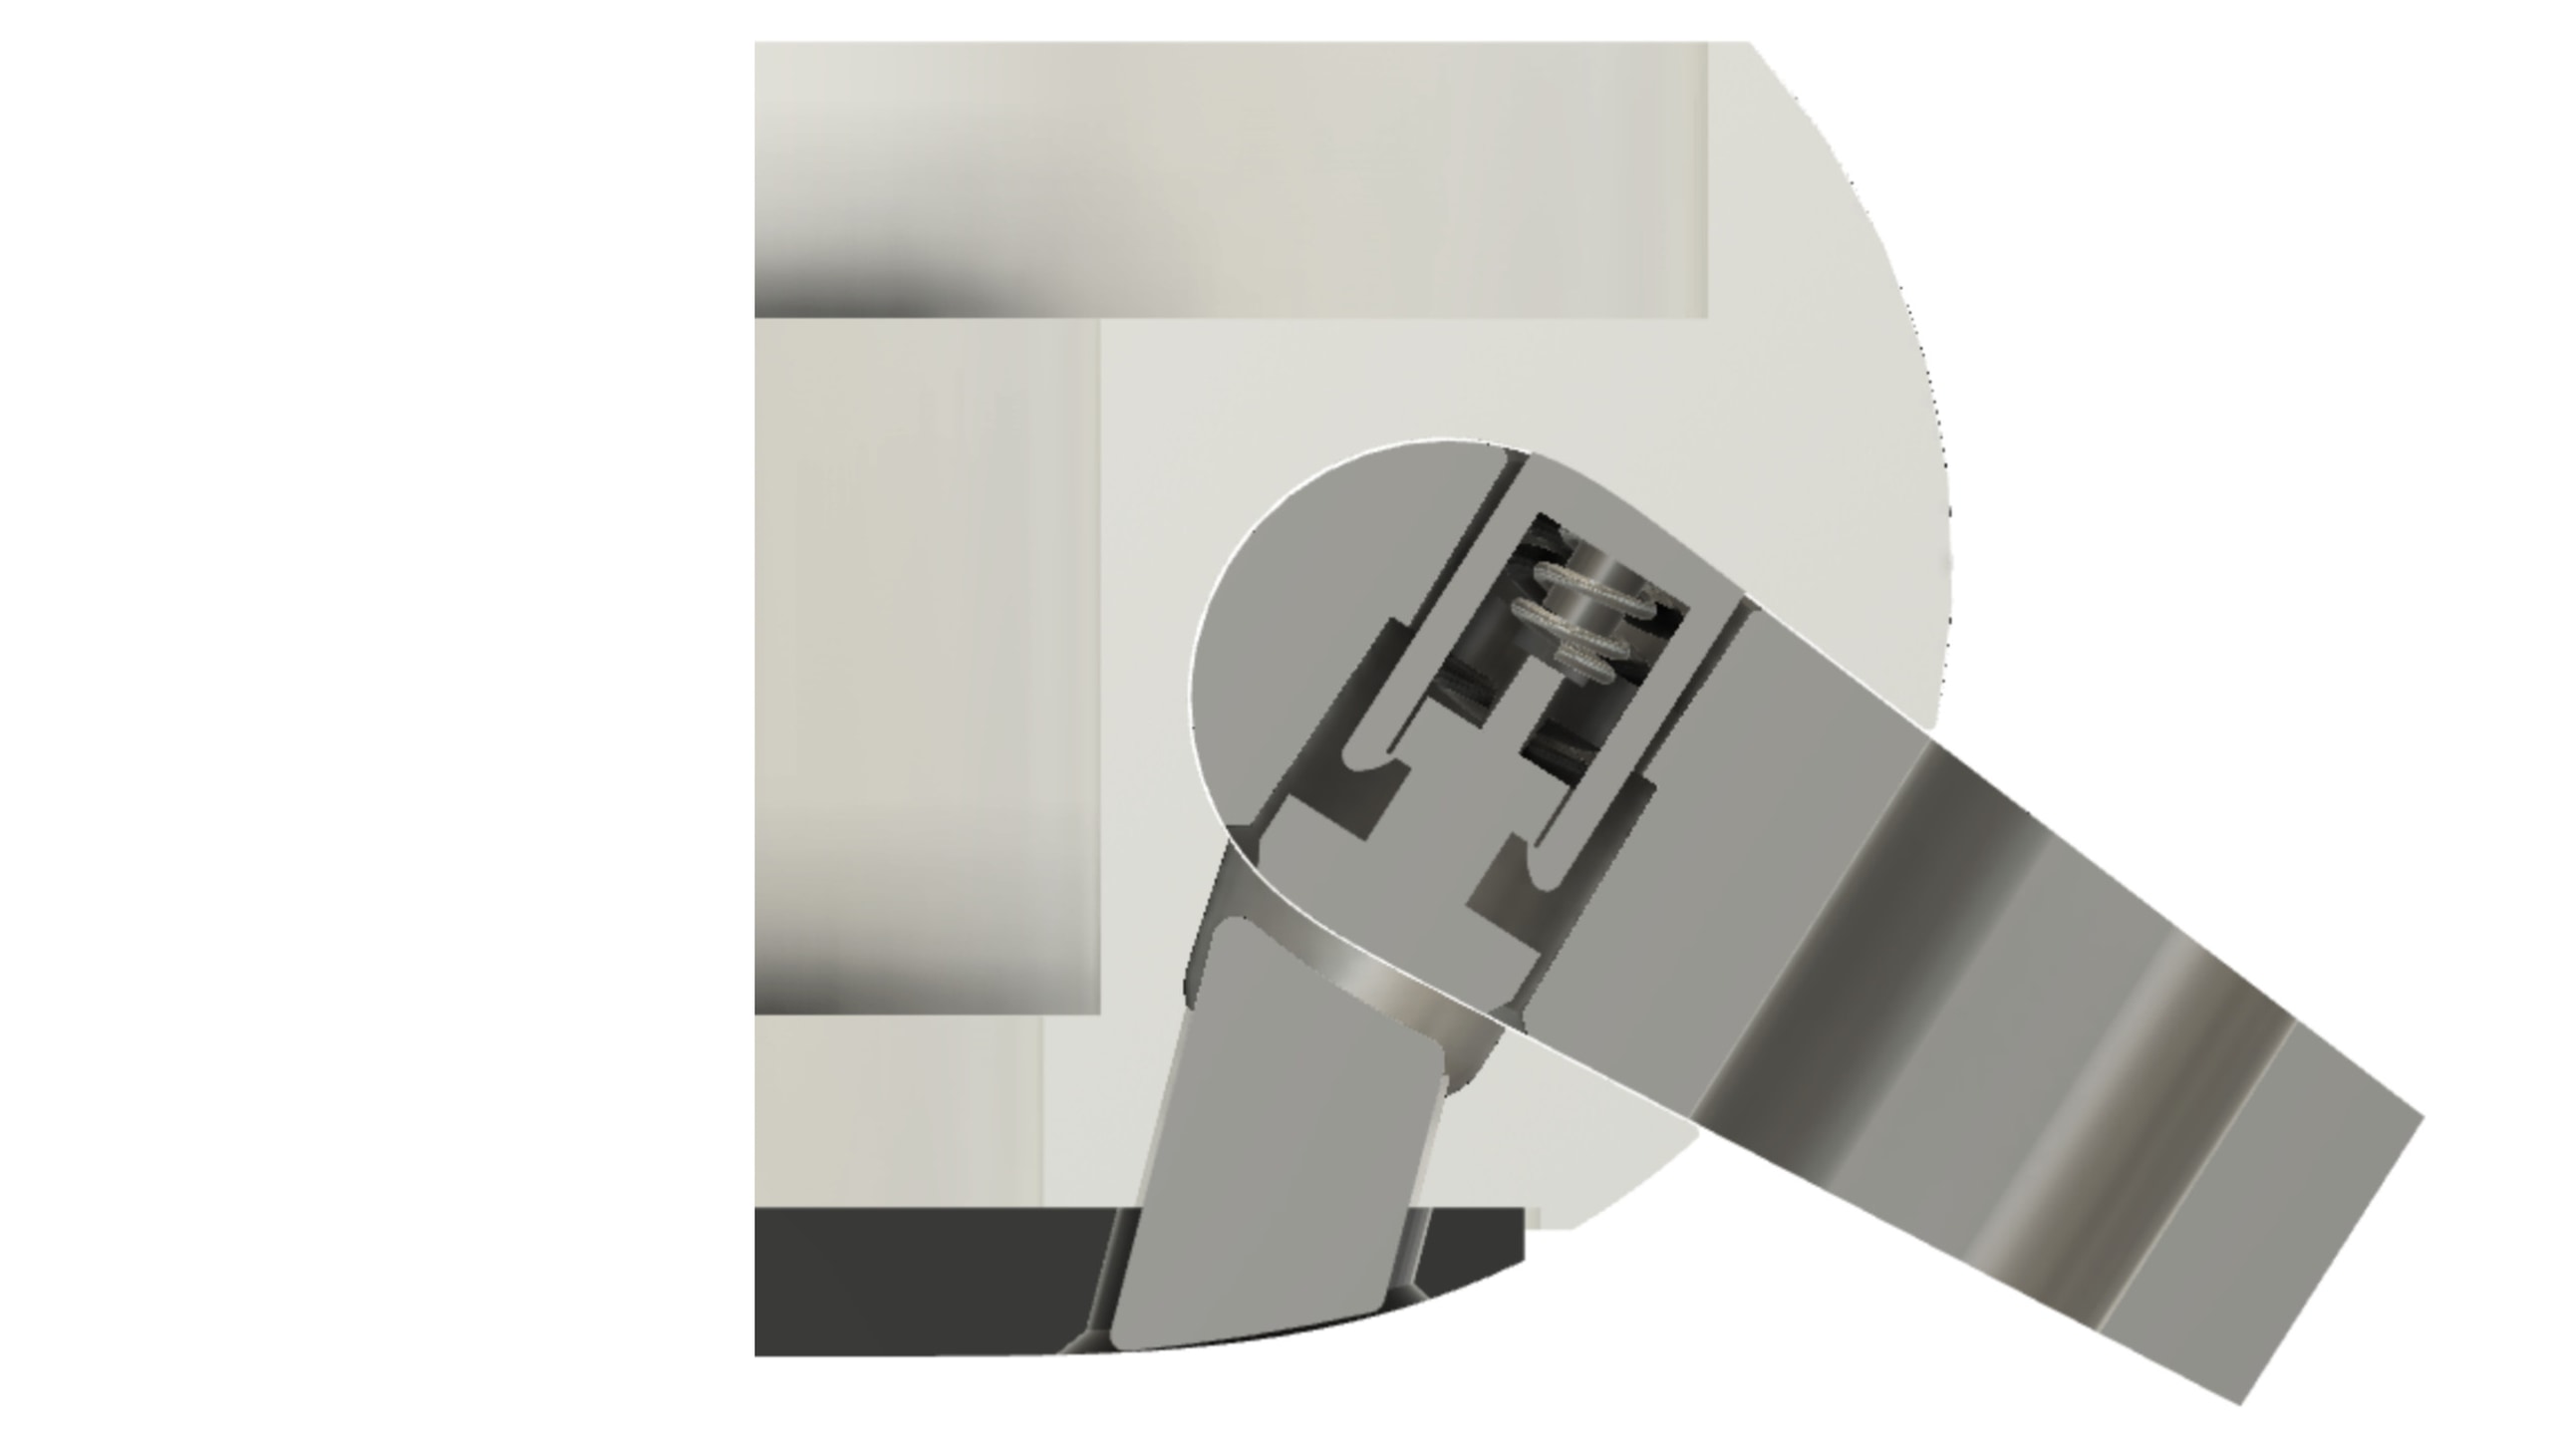 Cutout rendering showing the internal spring and tooth system within the Apple Watch's band slot